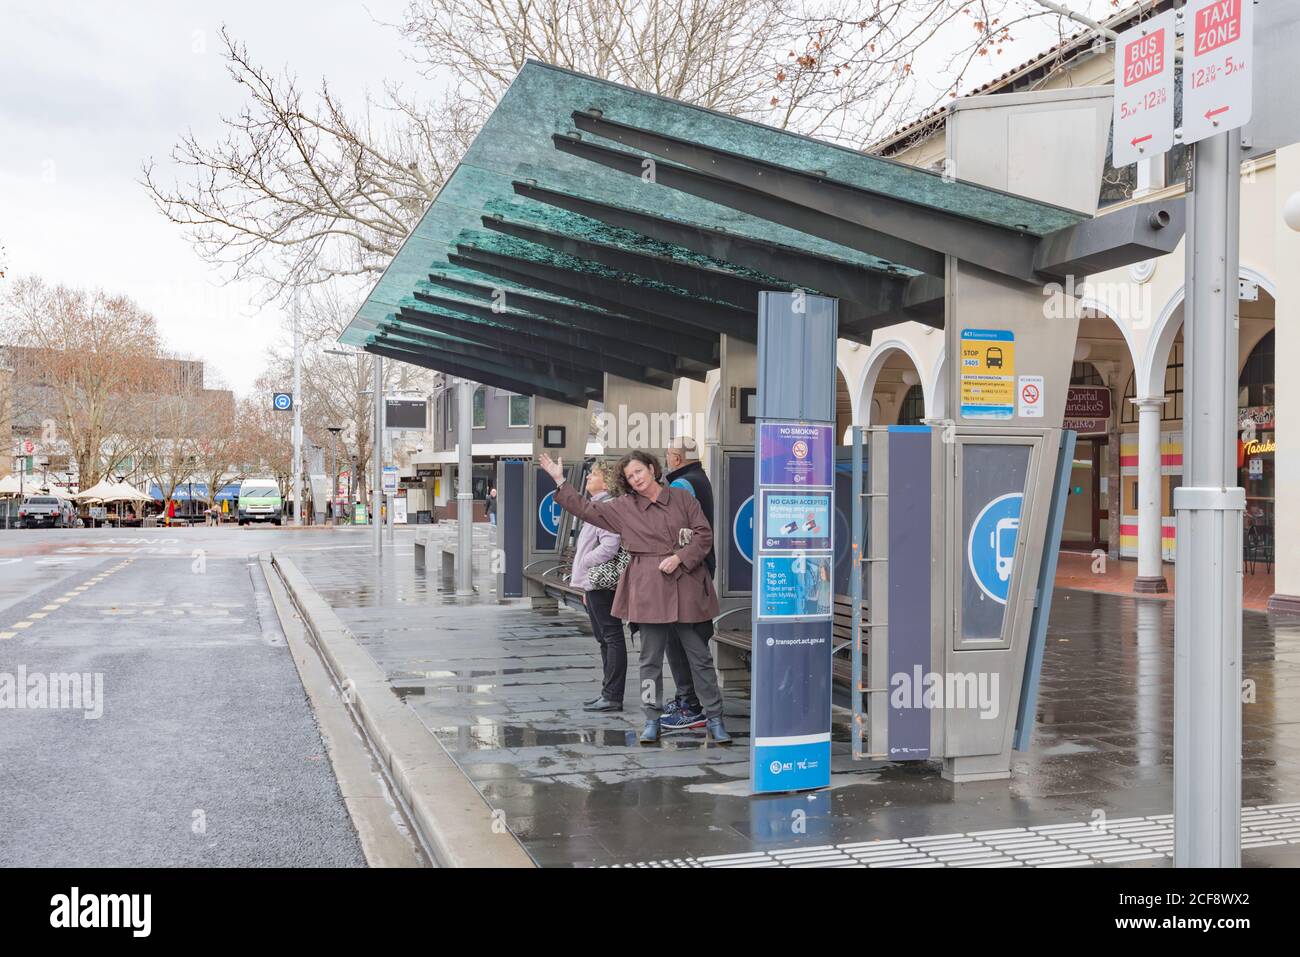 On a rainy day a woman waves down an oncoming bus at a bus stop in central Canberra City, ACT, Australia Stock Photo